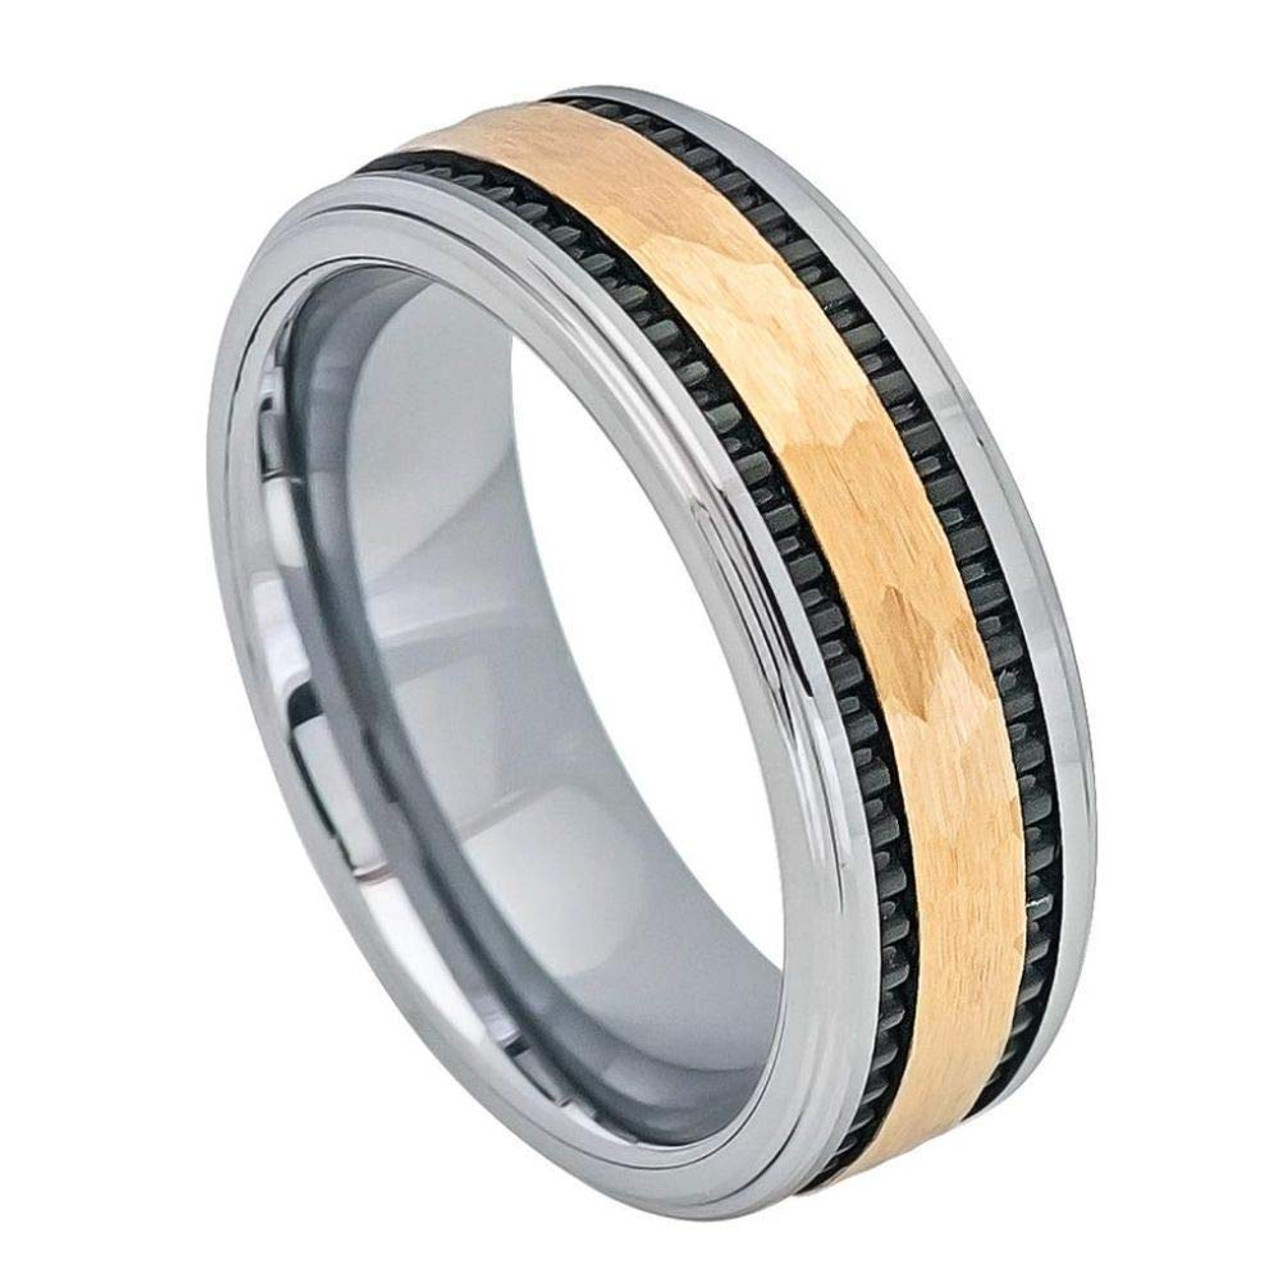 (8mm)  Unisex or Men's Hammered Tungsten Carbide Wedding ring band. Three Tone - Silver with Hammered Gold and Black Inlay - Tungsten Carbide Ring